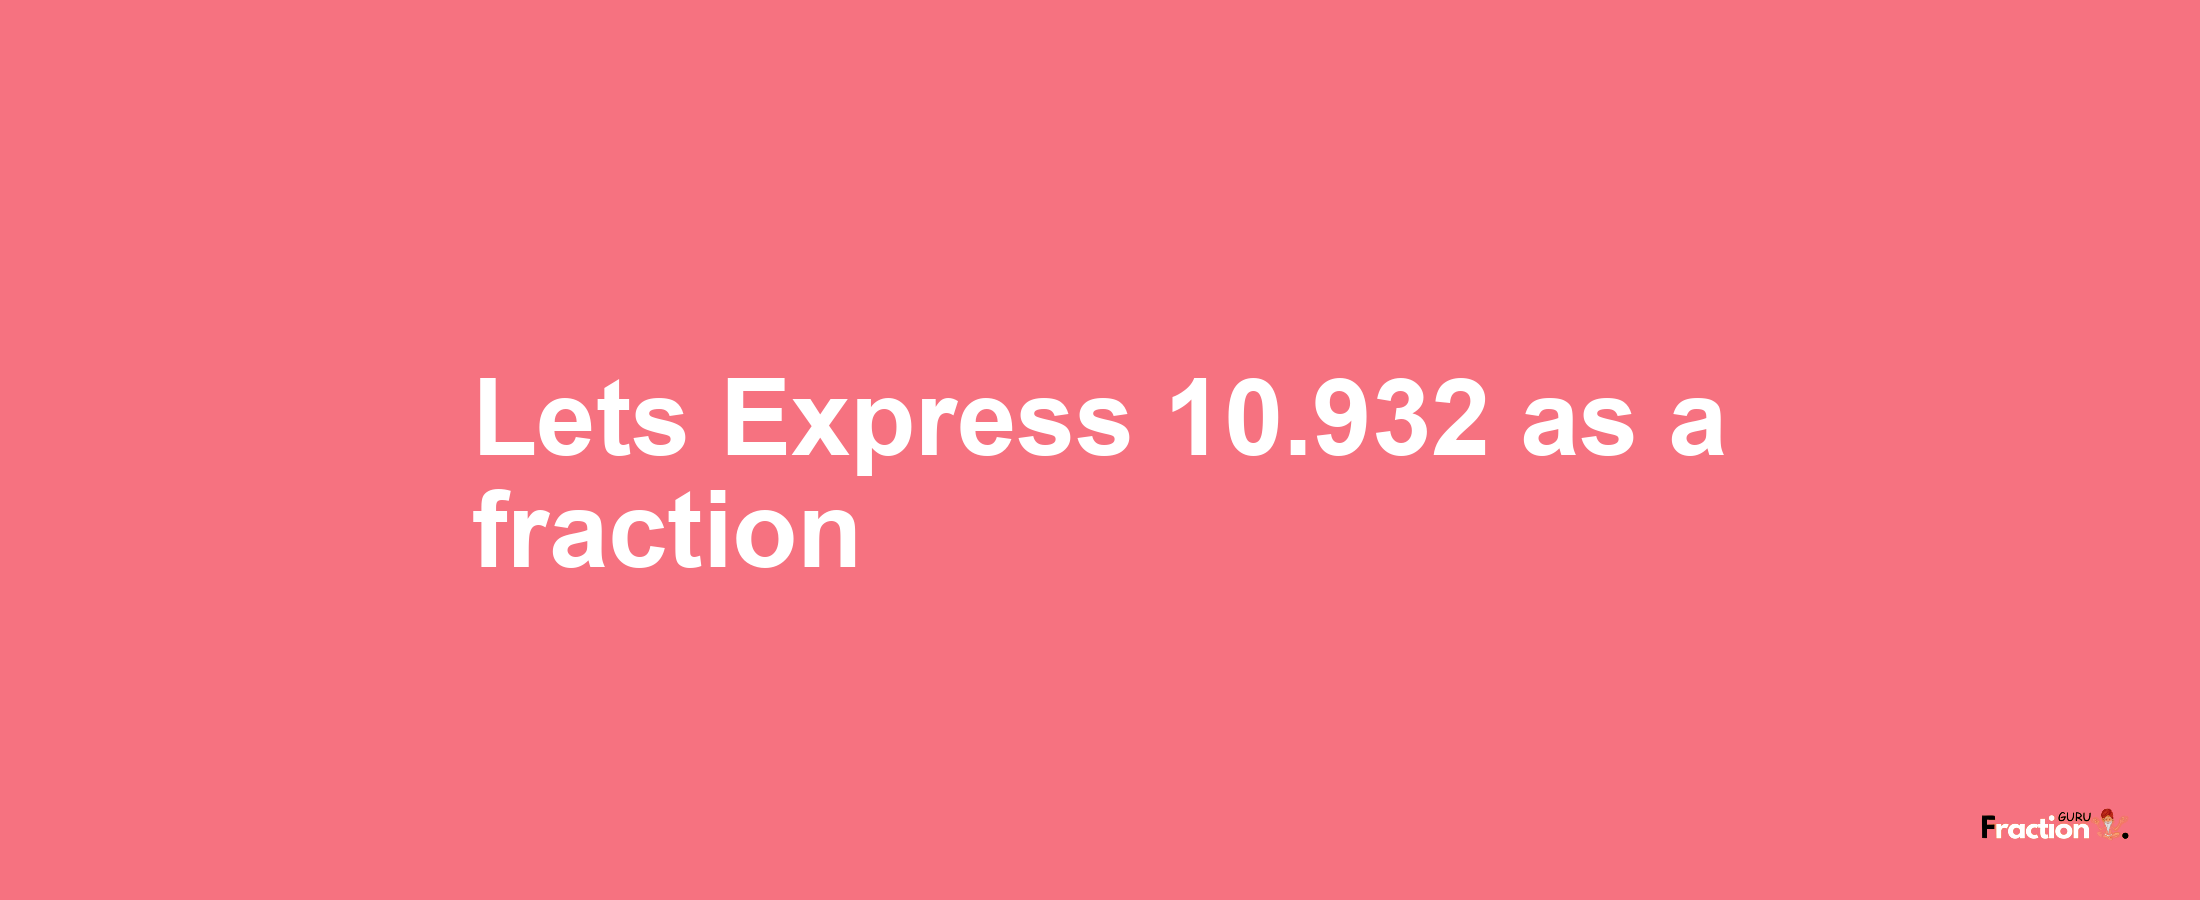 Lets Express 10.932 as afraction